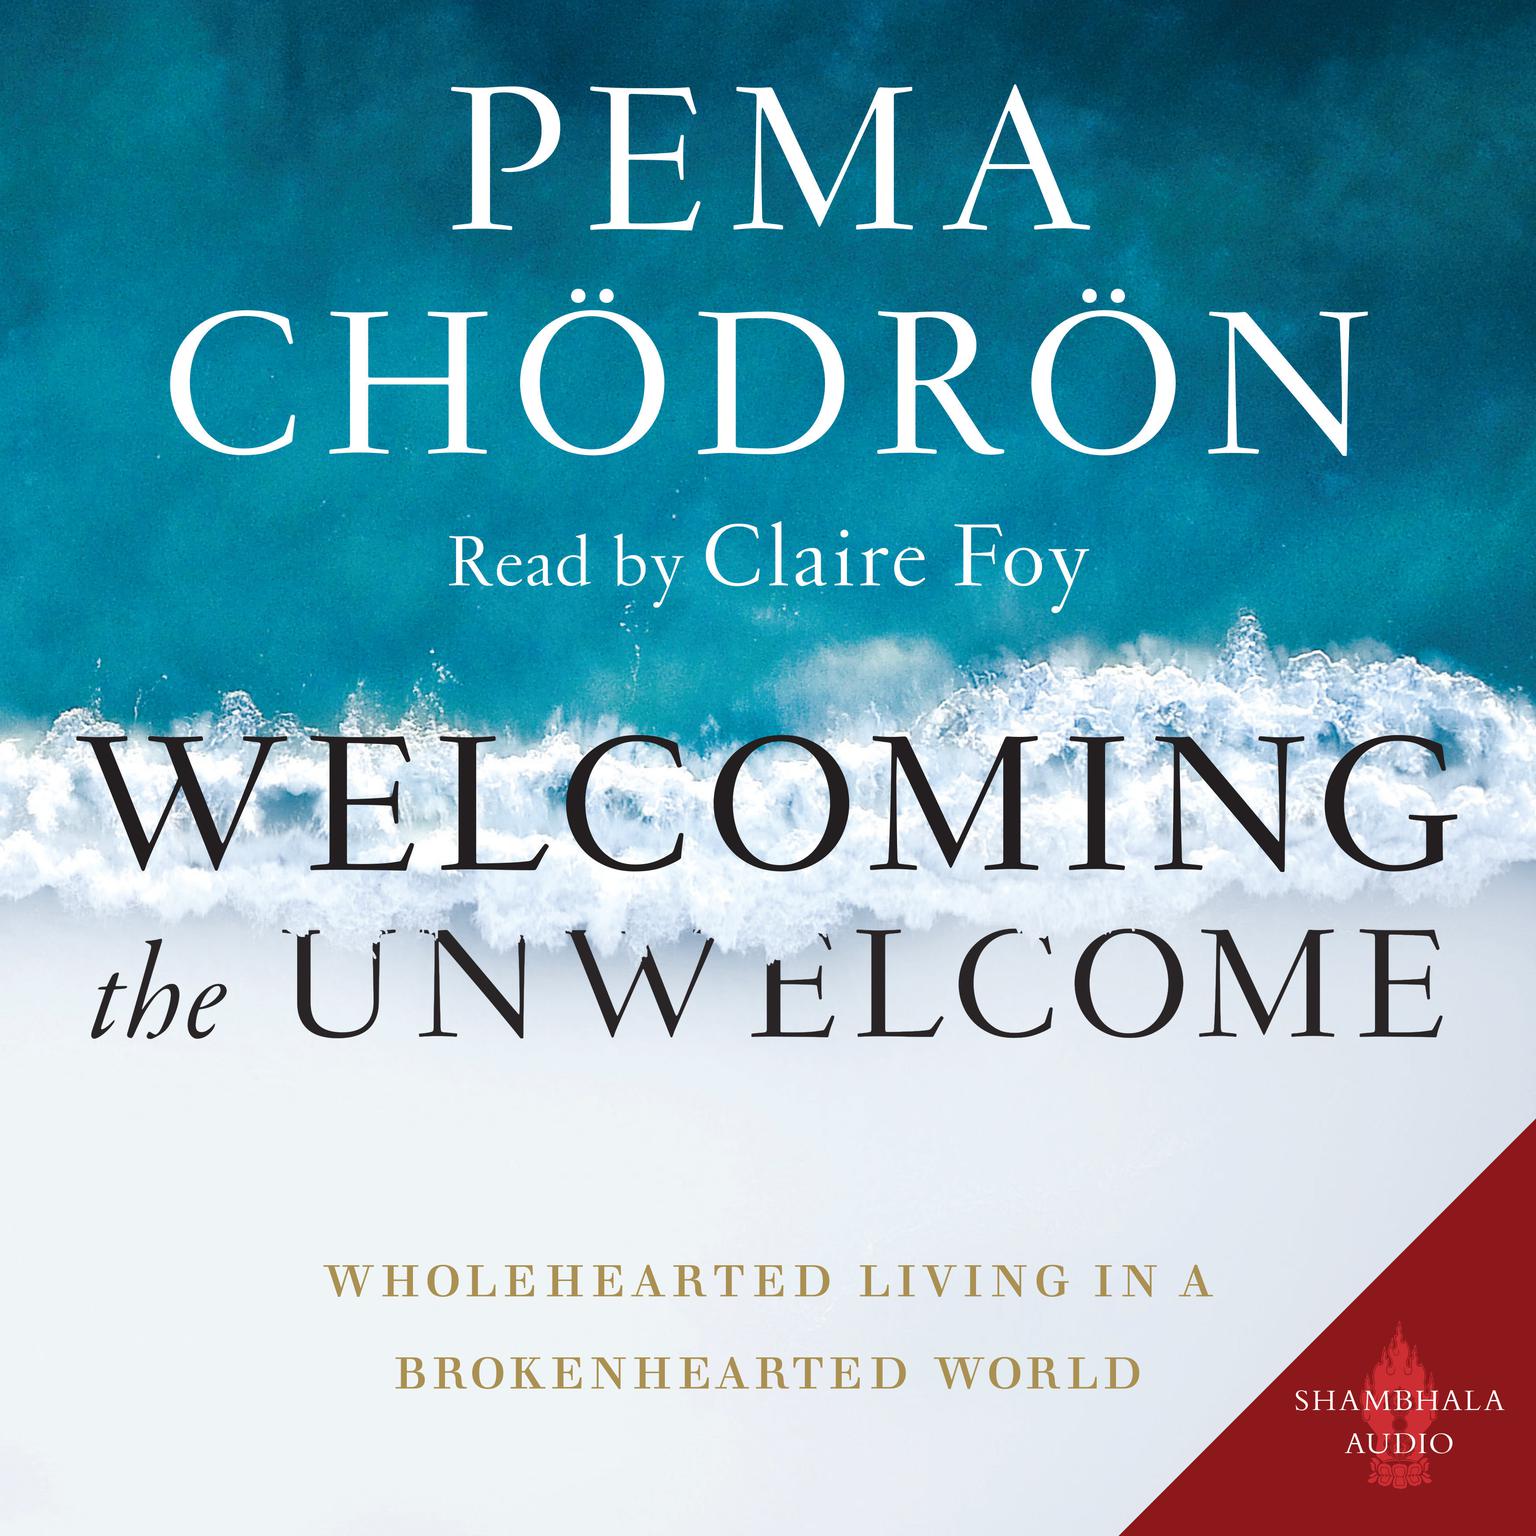 Welcoming the Unwelcome: Wholehearted Living in a Brokenhearted World Audiobook, by Pema Chödrön